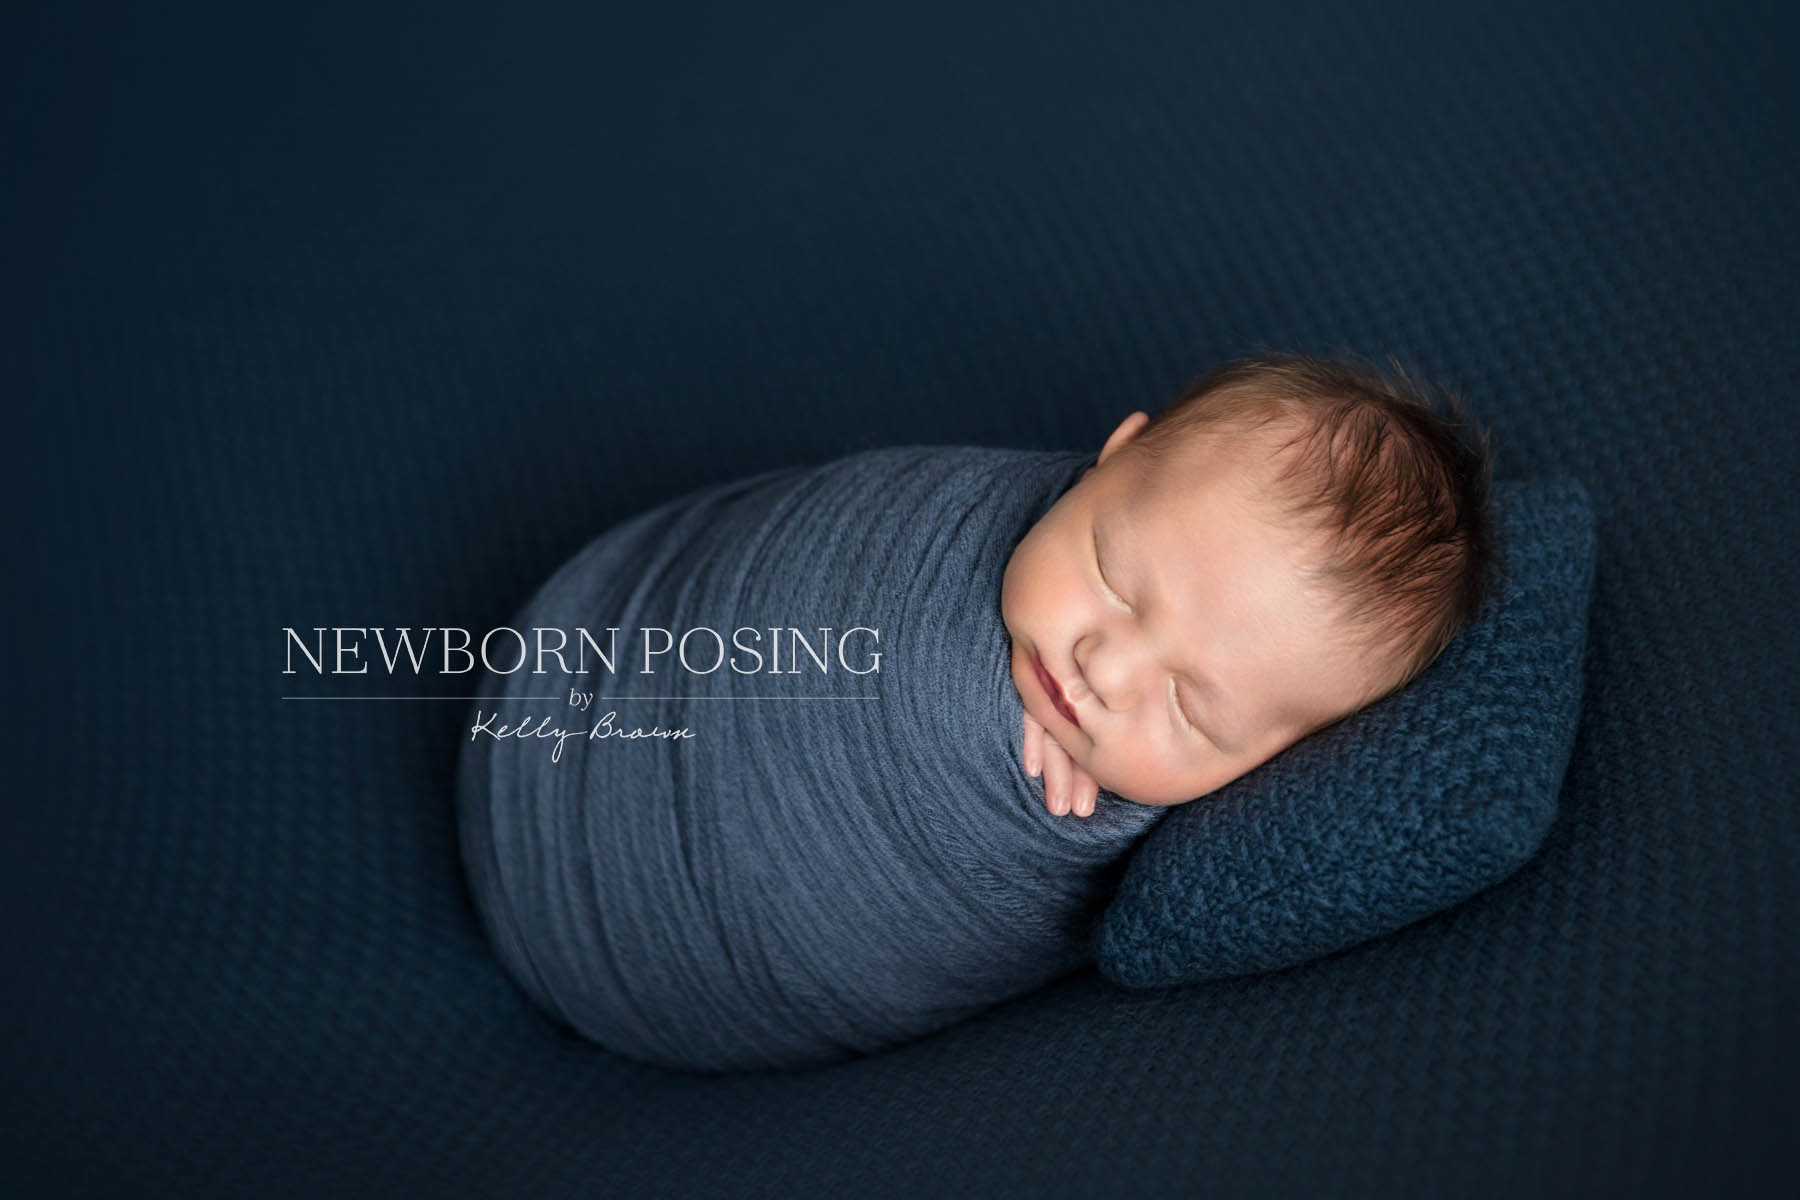 Newborn photography of baby lying on their side